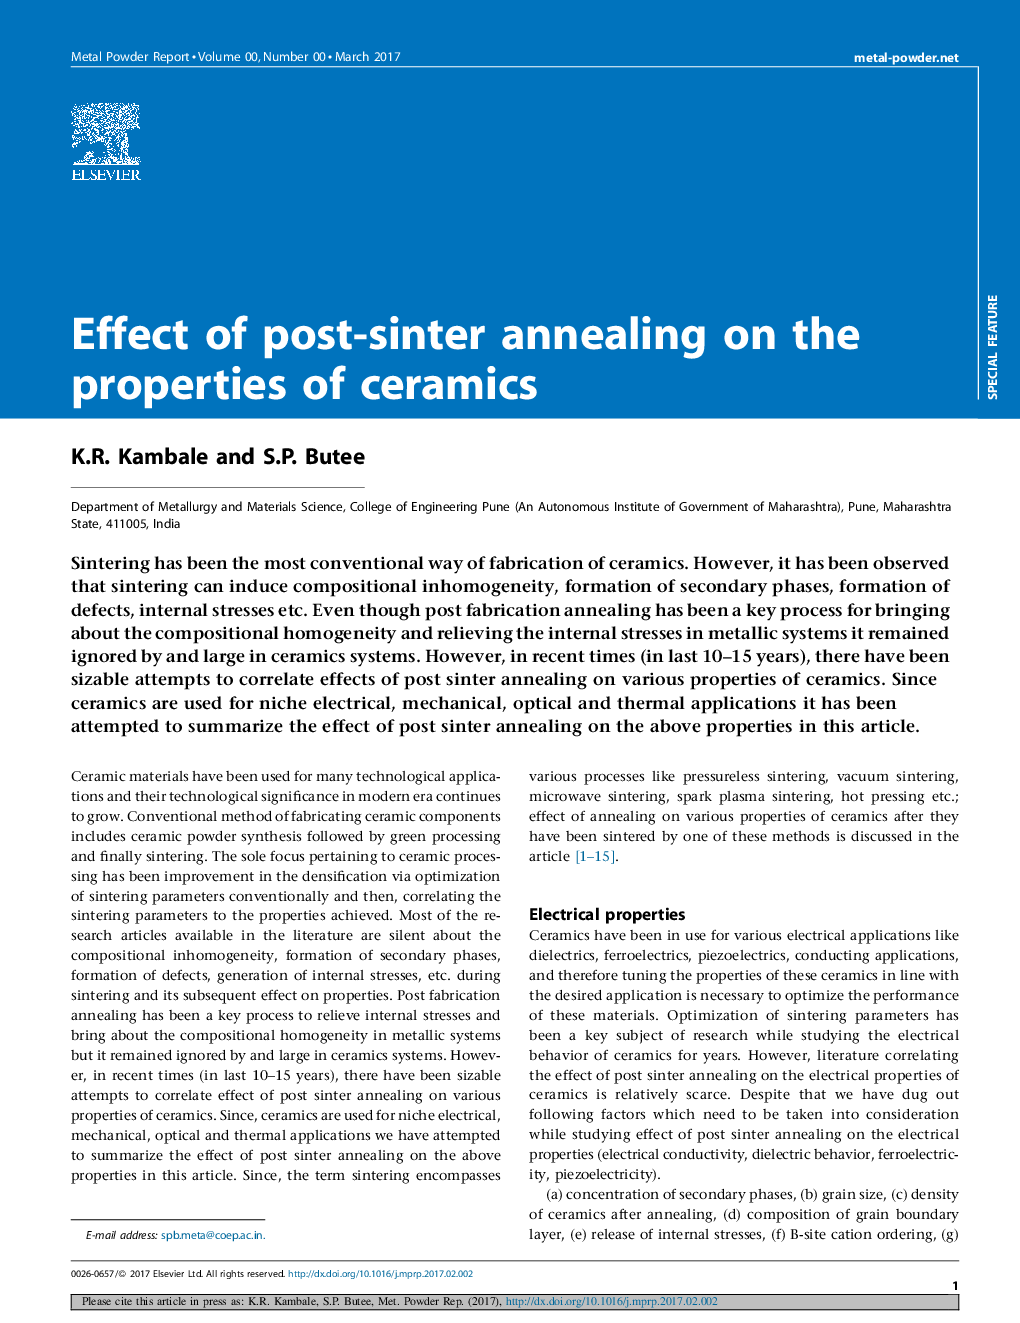 Effect of post-sinter annealing on the properties of ceramics